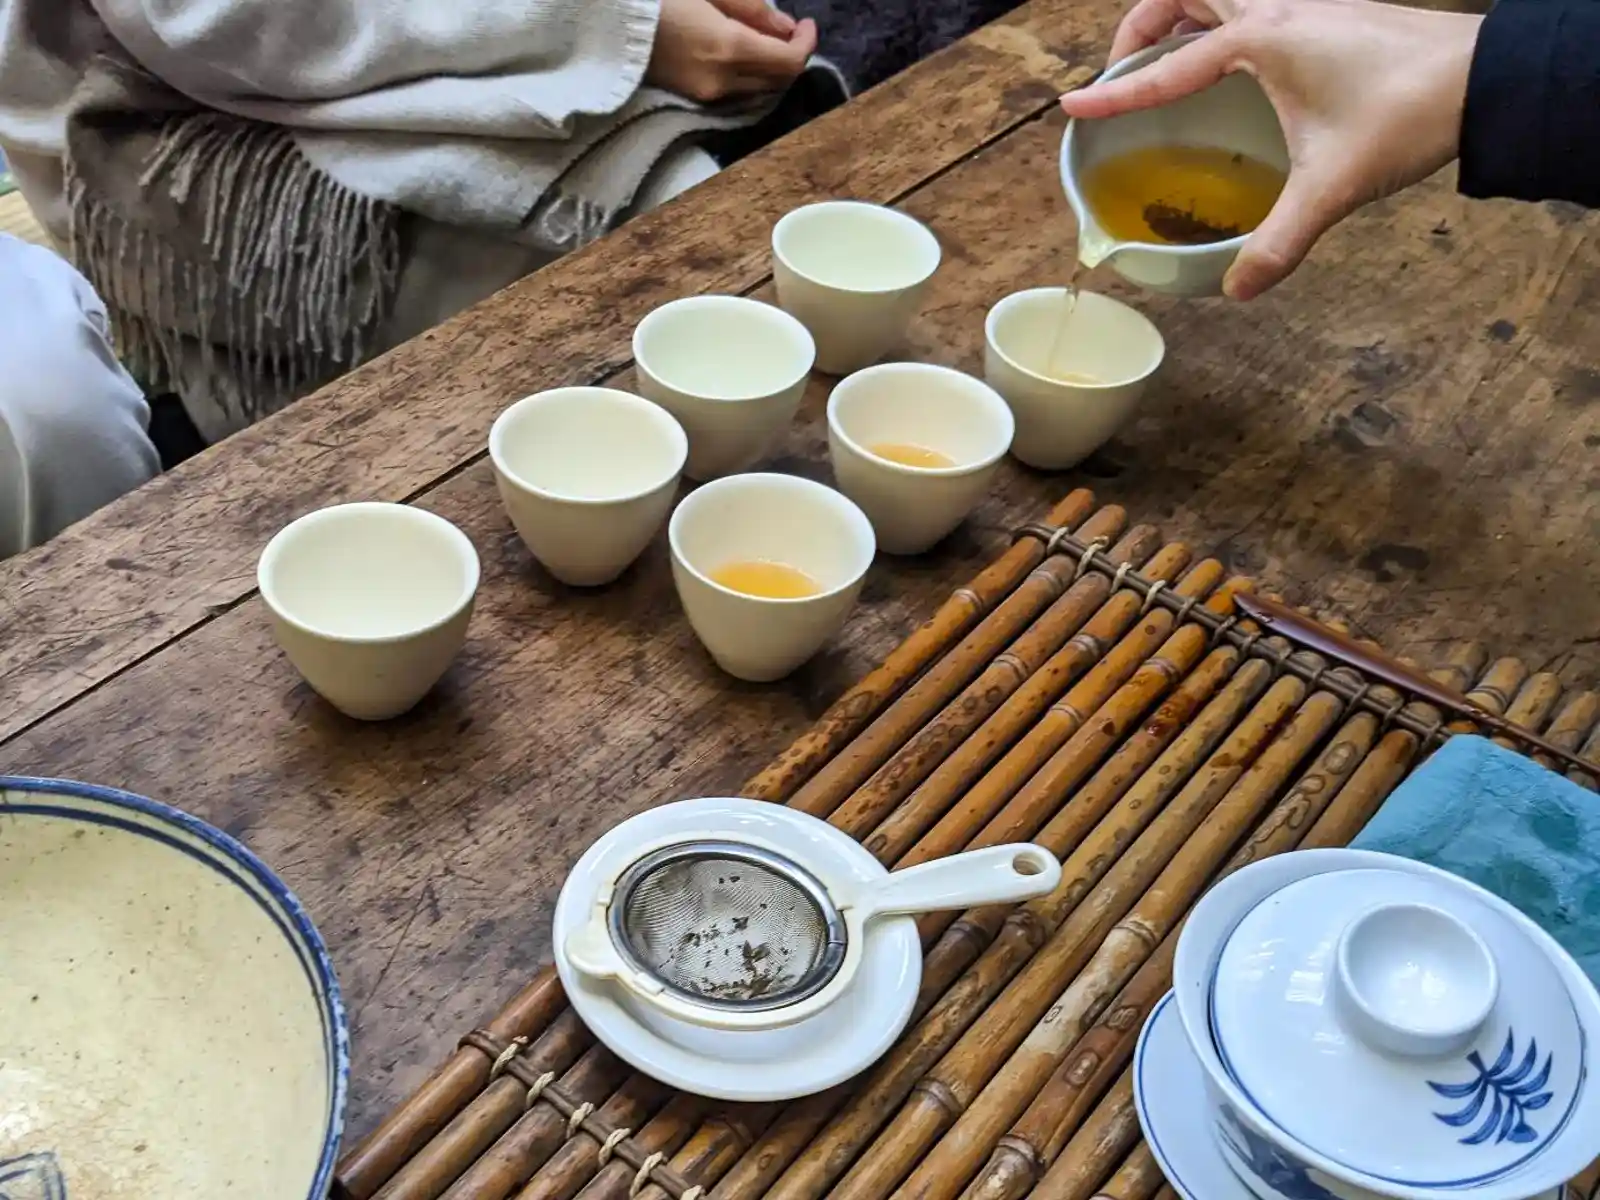 Tea is being poured from a tea serving pot into smaller tea cups.